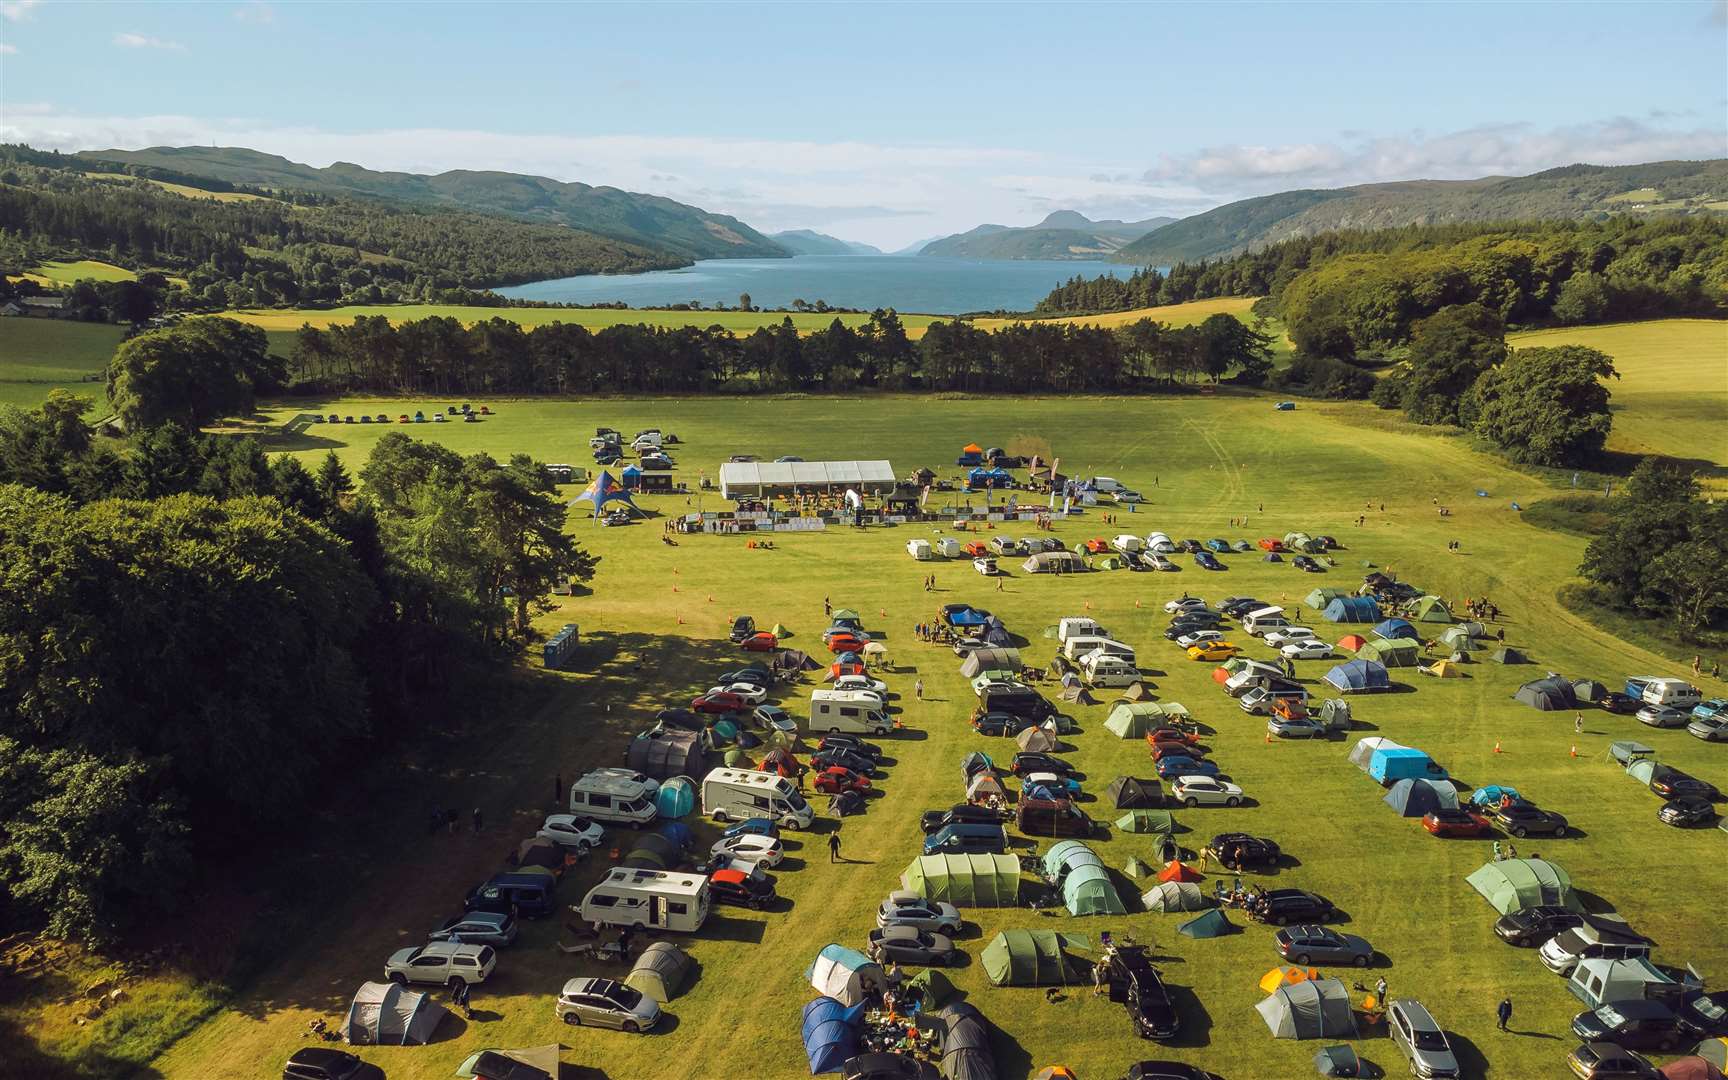 The campsite and start and finish area for the Loch Ness 24 is a hive of activity during the event.